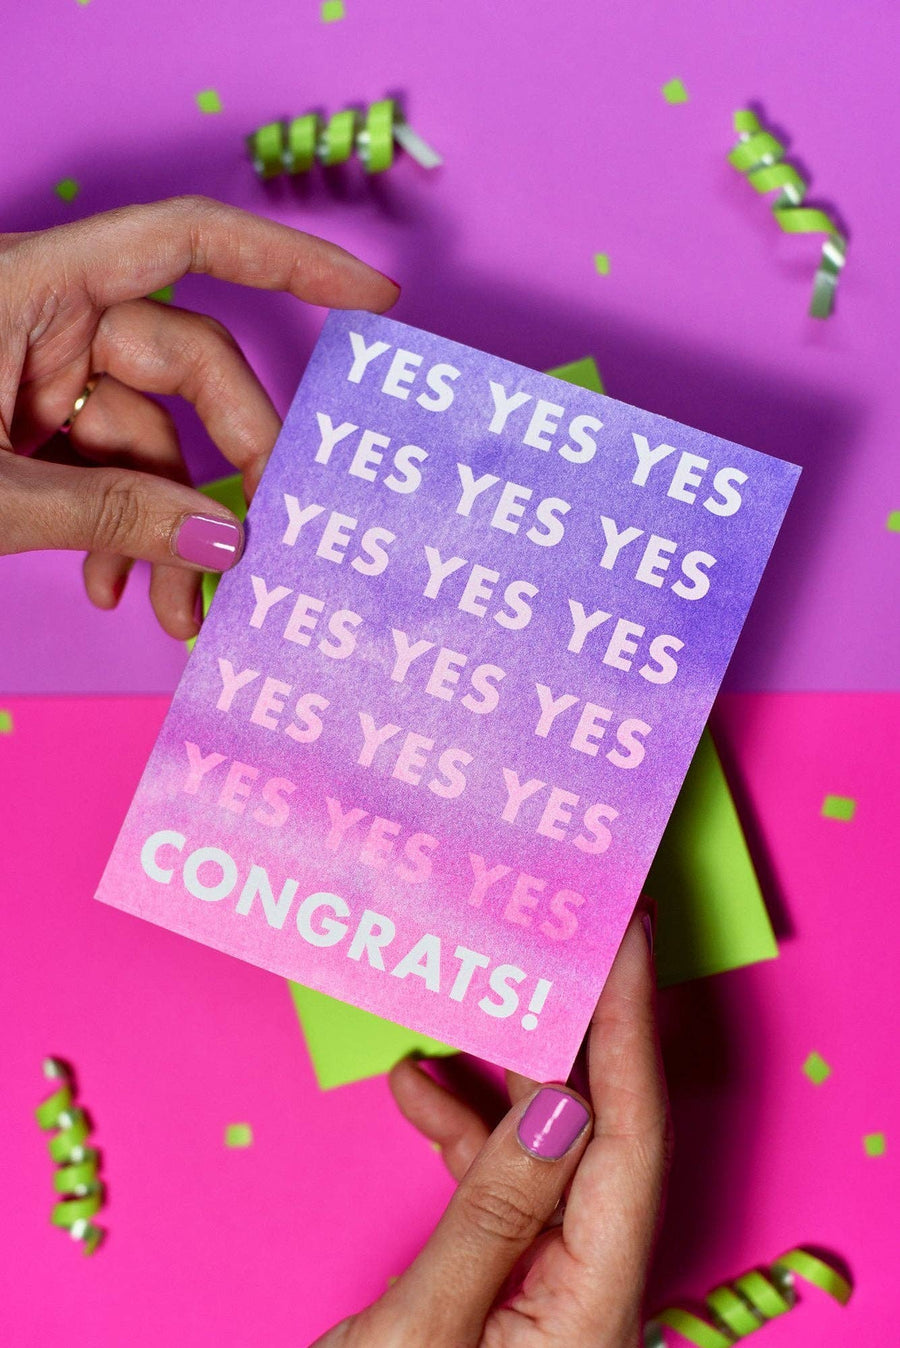 YES YES YES ... Congrats! - Risograph Greeting Card